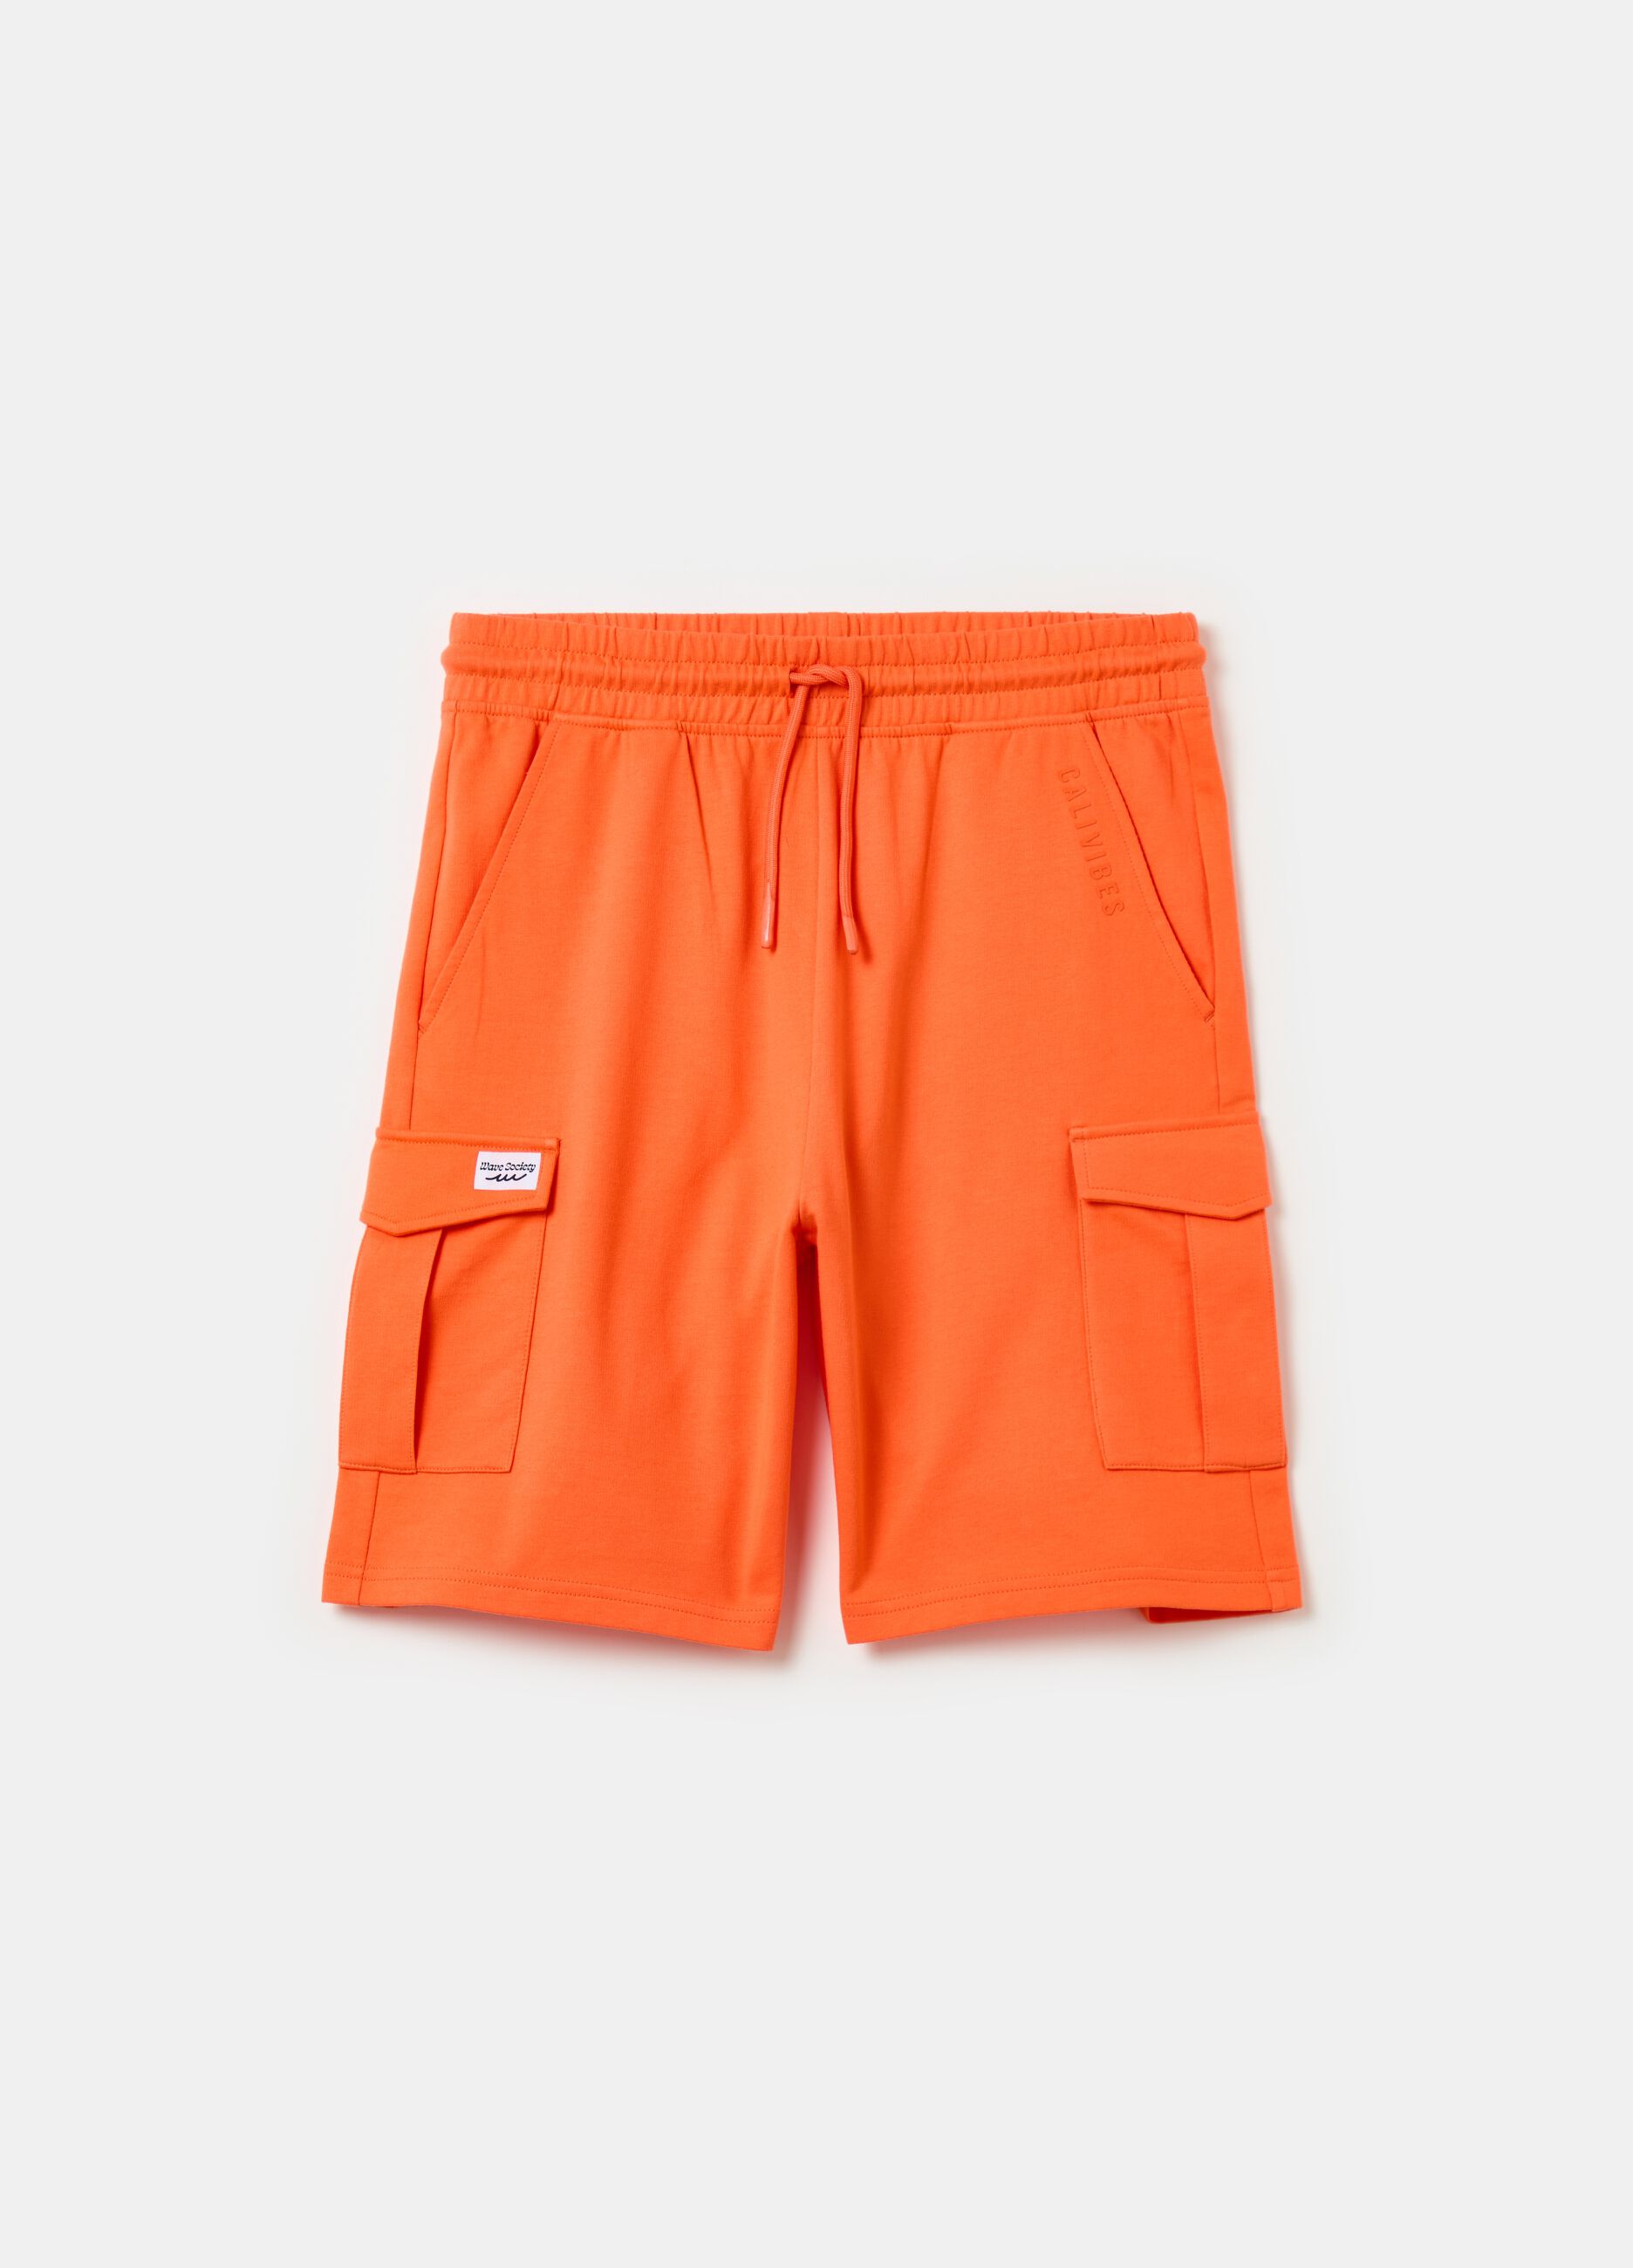 Cargo Bermuda shorts in French terry with drawstring